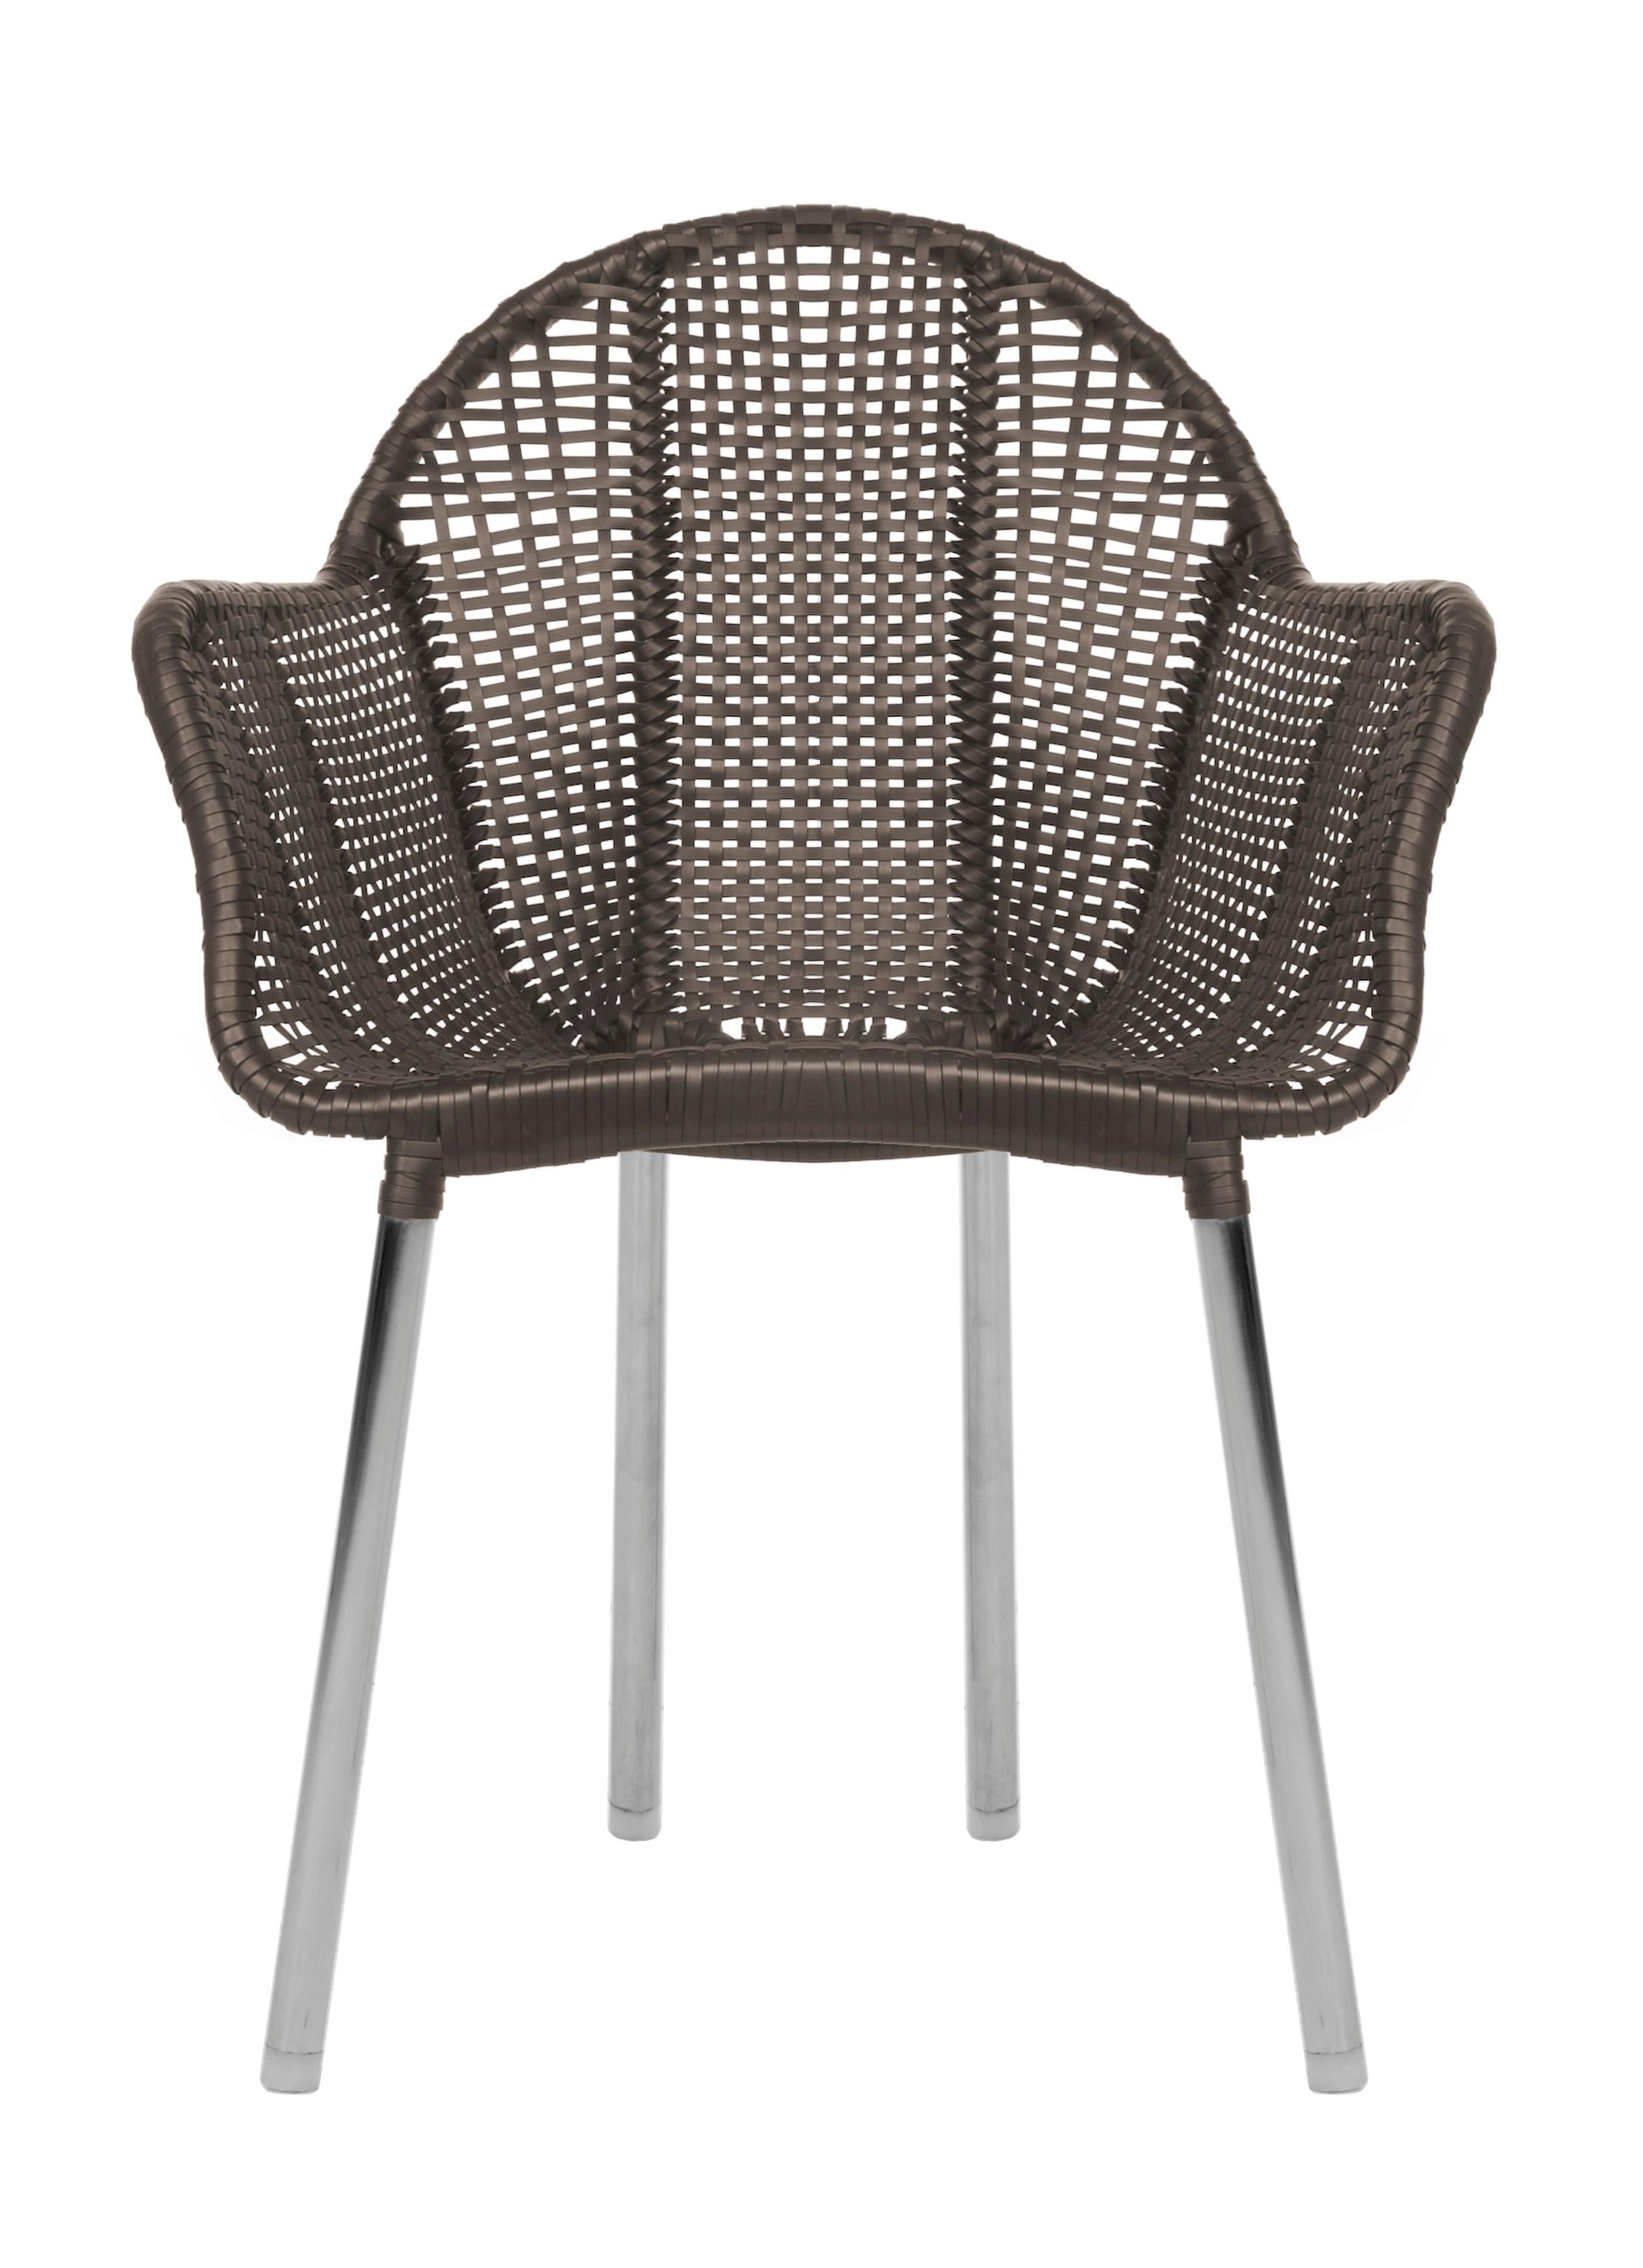 Marcel armchair by Kenneth Cobonpue.
Materials: Polyethelene, stainless steel, aluminum. 
Also available in other colors.
Dimensions: 60cm x 62cm x H 82cm 

The Marcel collection complements any outdoor space with pieces that are made for